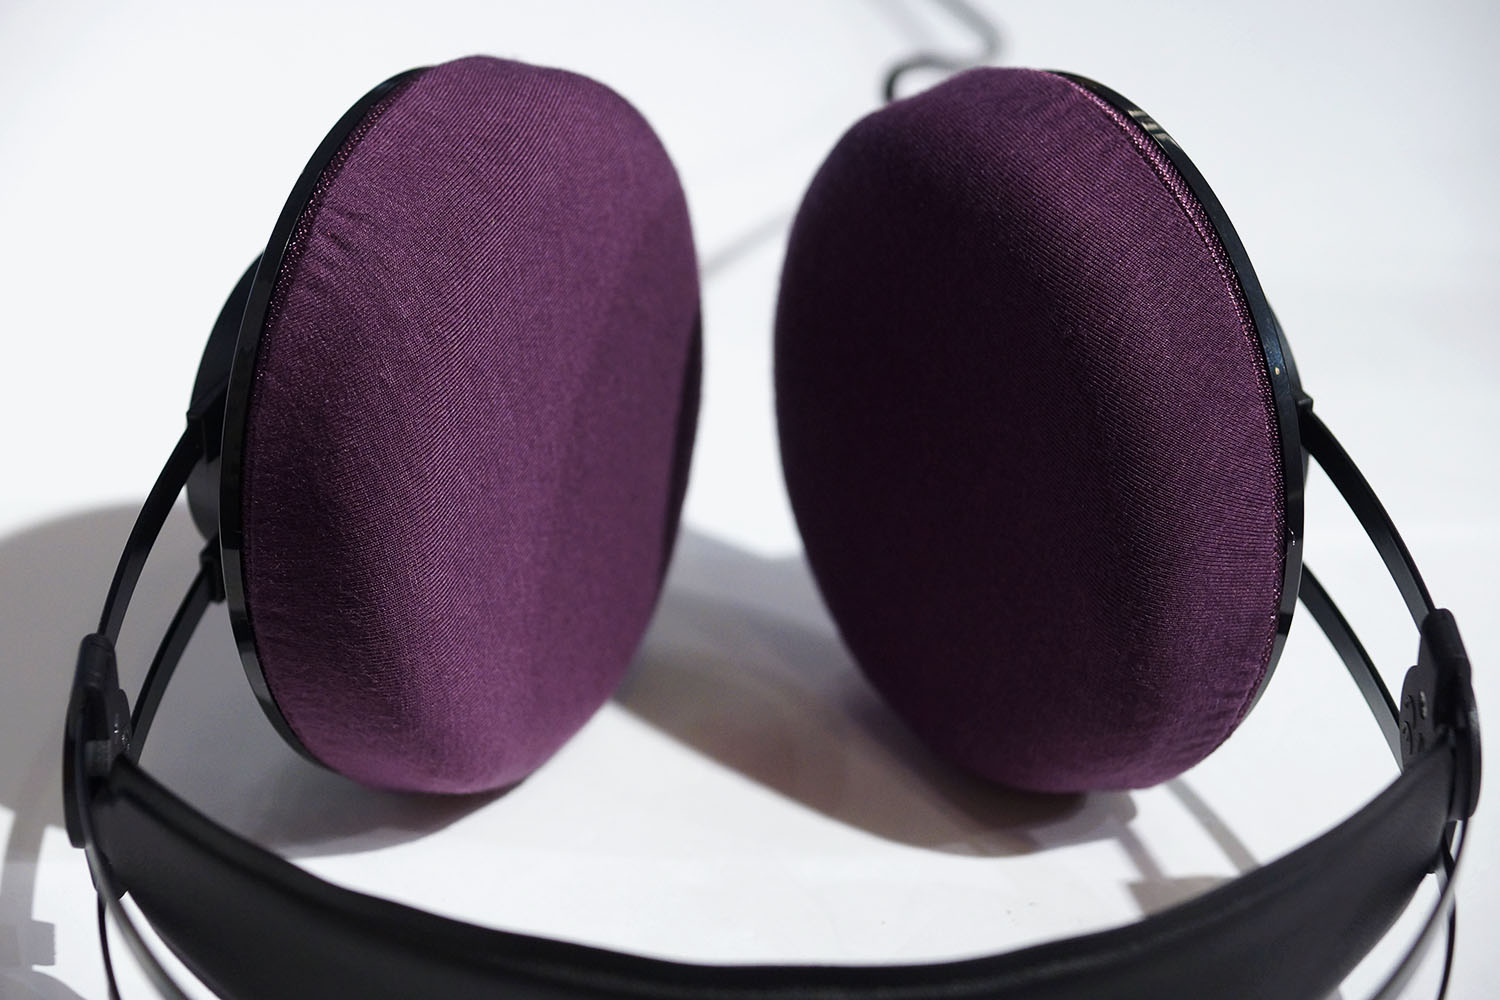 AKG K52 earpad repair and protection: Super Stretch Headphone Cover mimimamo